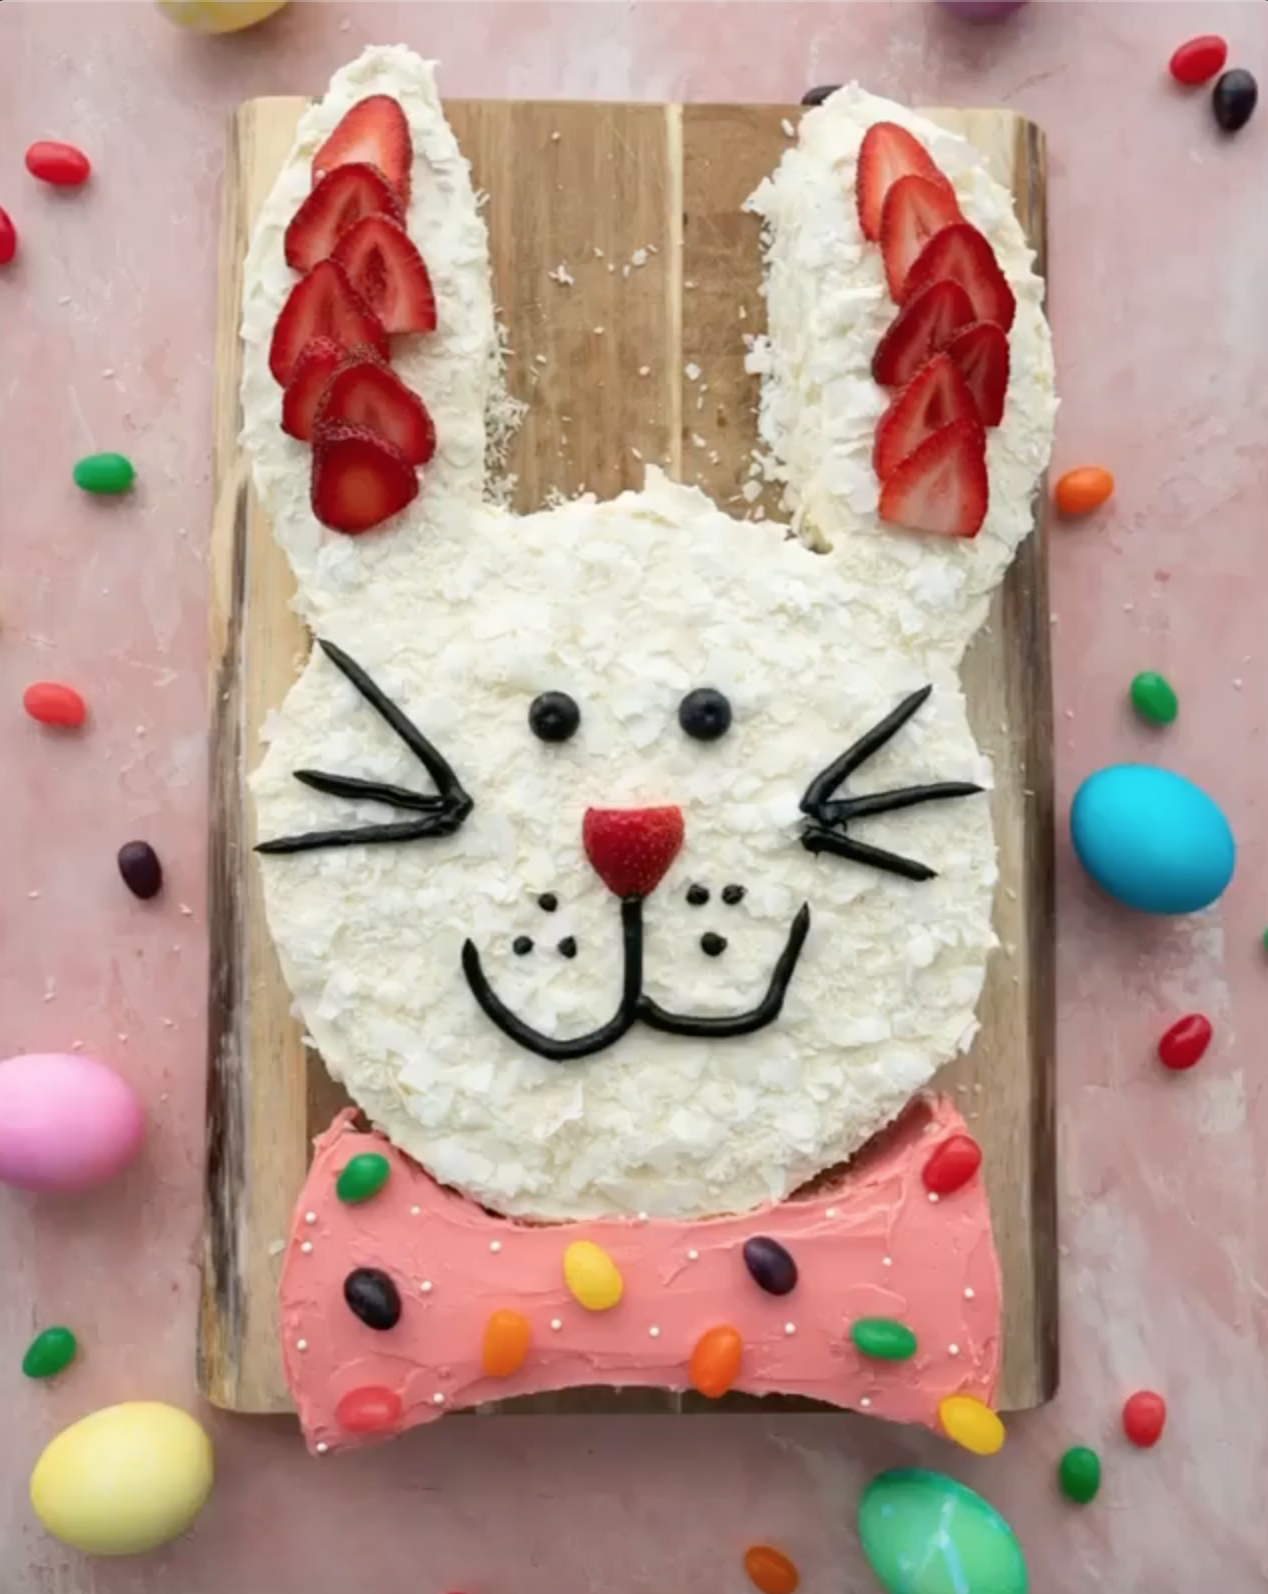 Adorable Bunny Cake That's Beyond Perfect for Easter - XO, Katie Rosario |  Recipe | Bunny cake, Drip cakes, Cake decorating for beginners